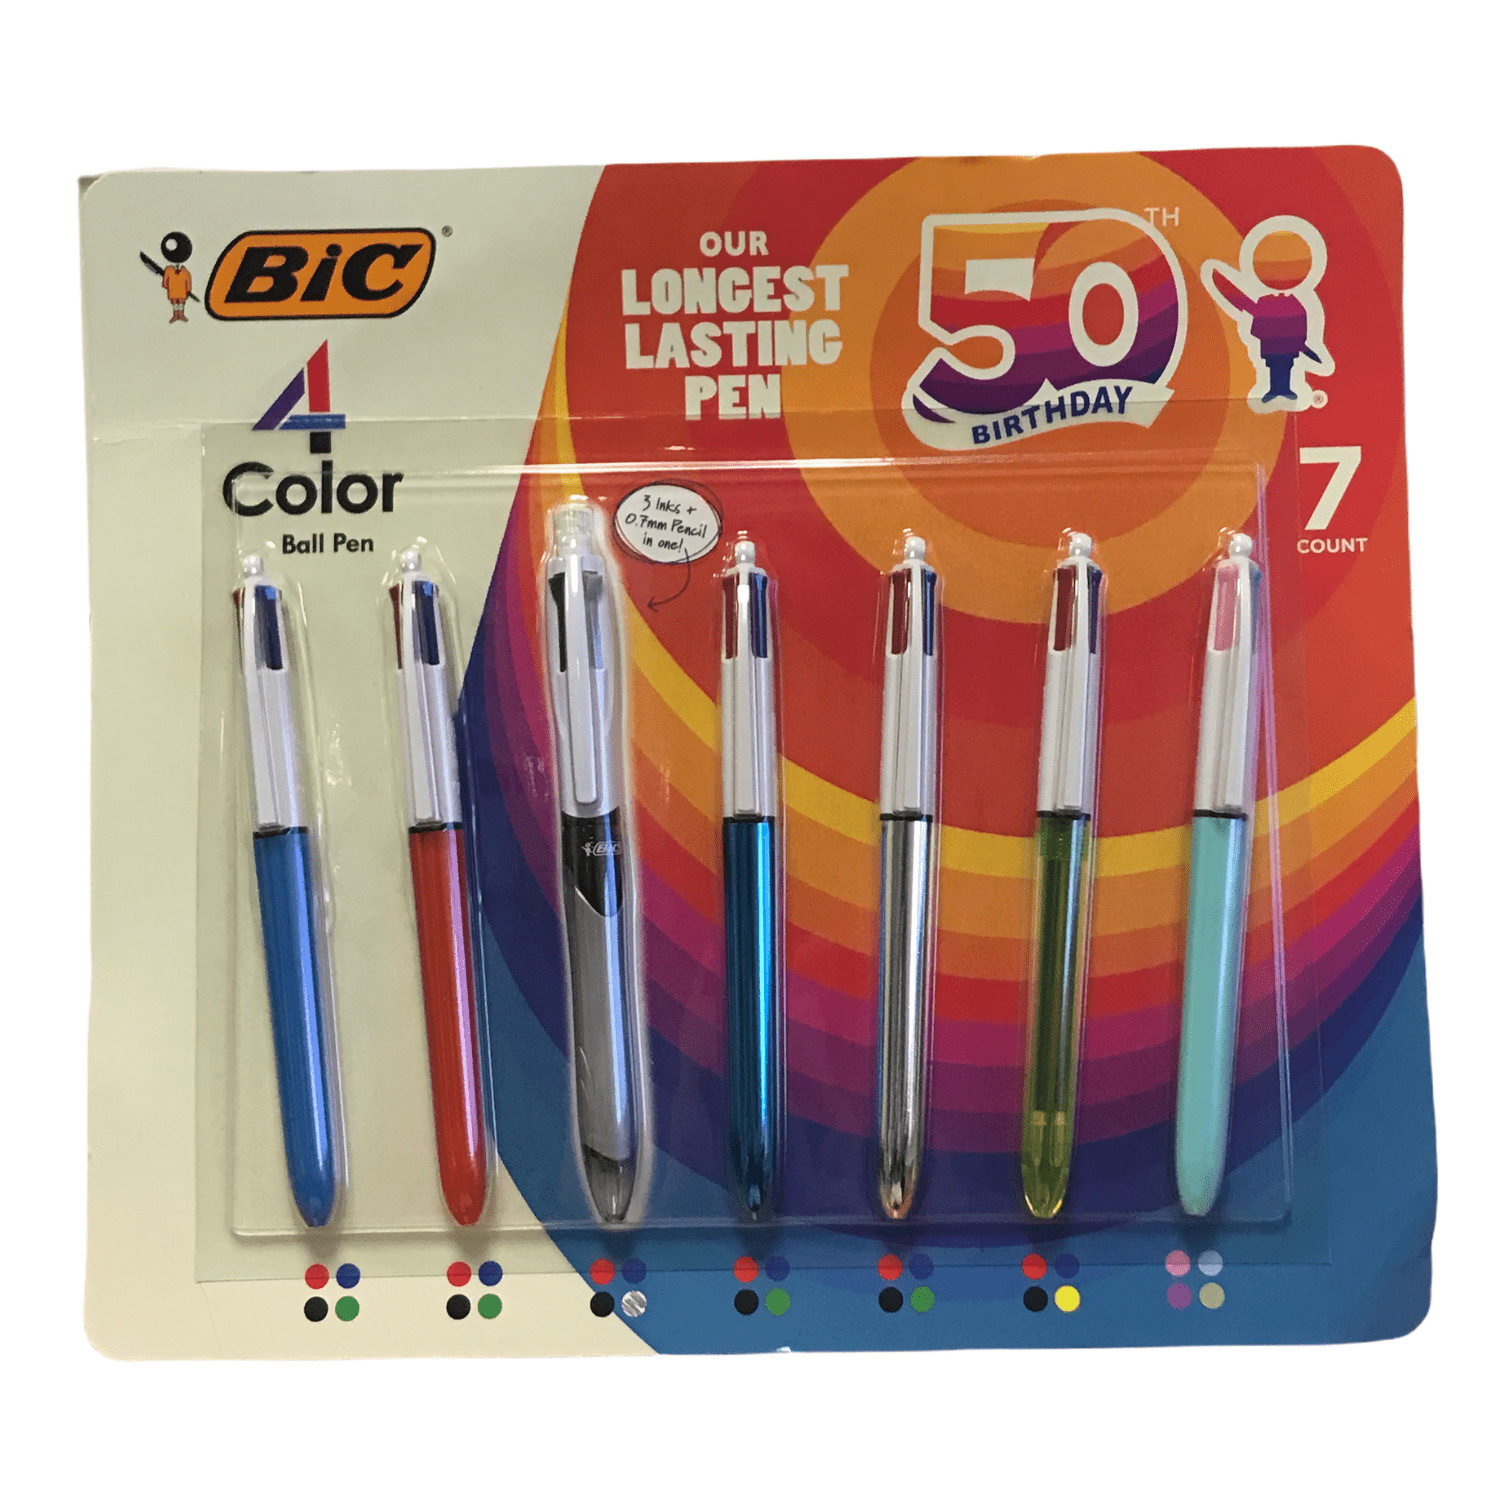 MMXP11 - Ast BIC 4-Color Ball Point Pen 6 Total Six 1 Count Packs